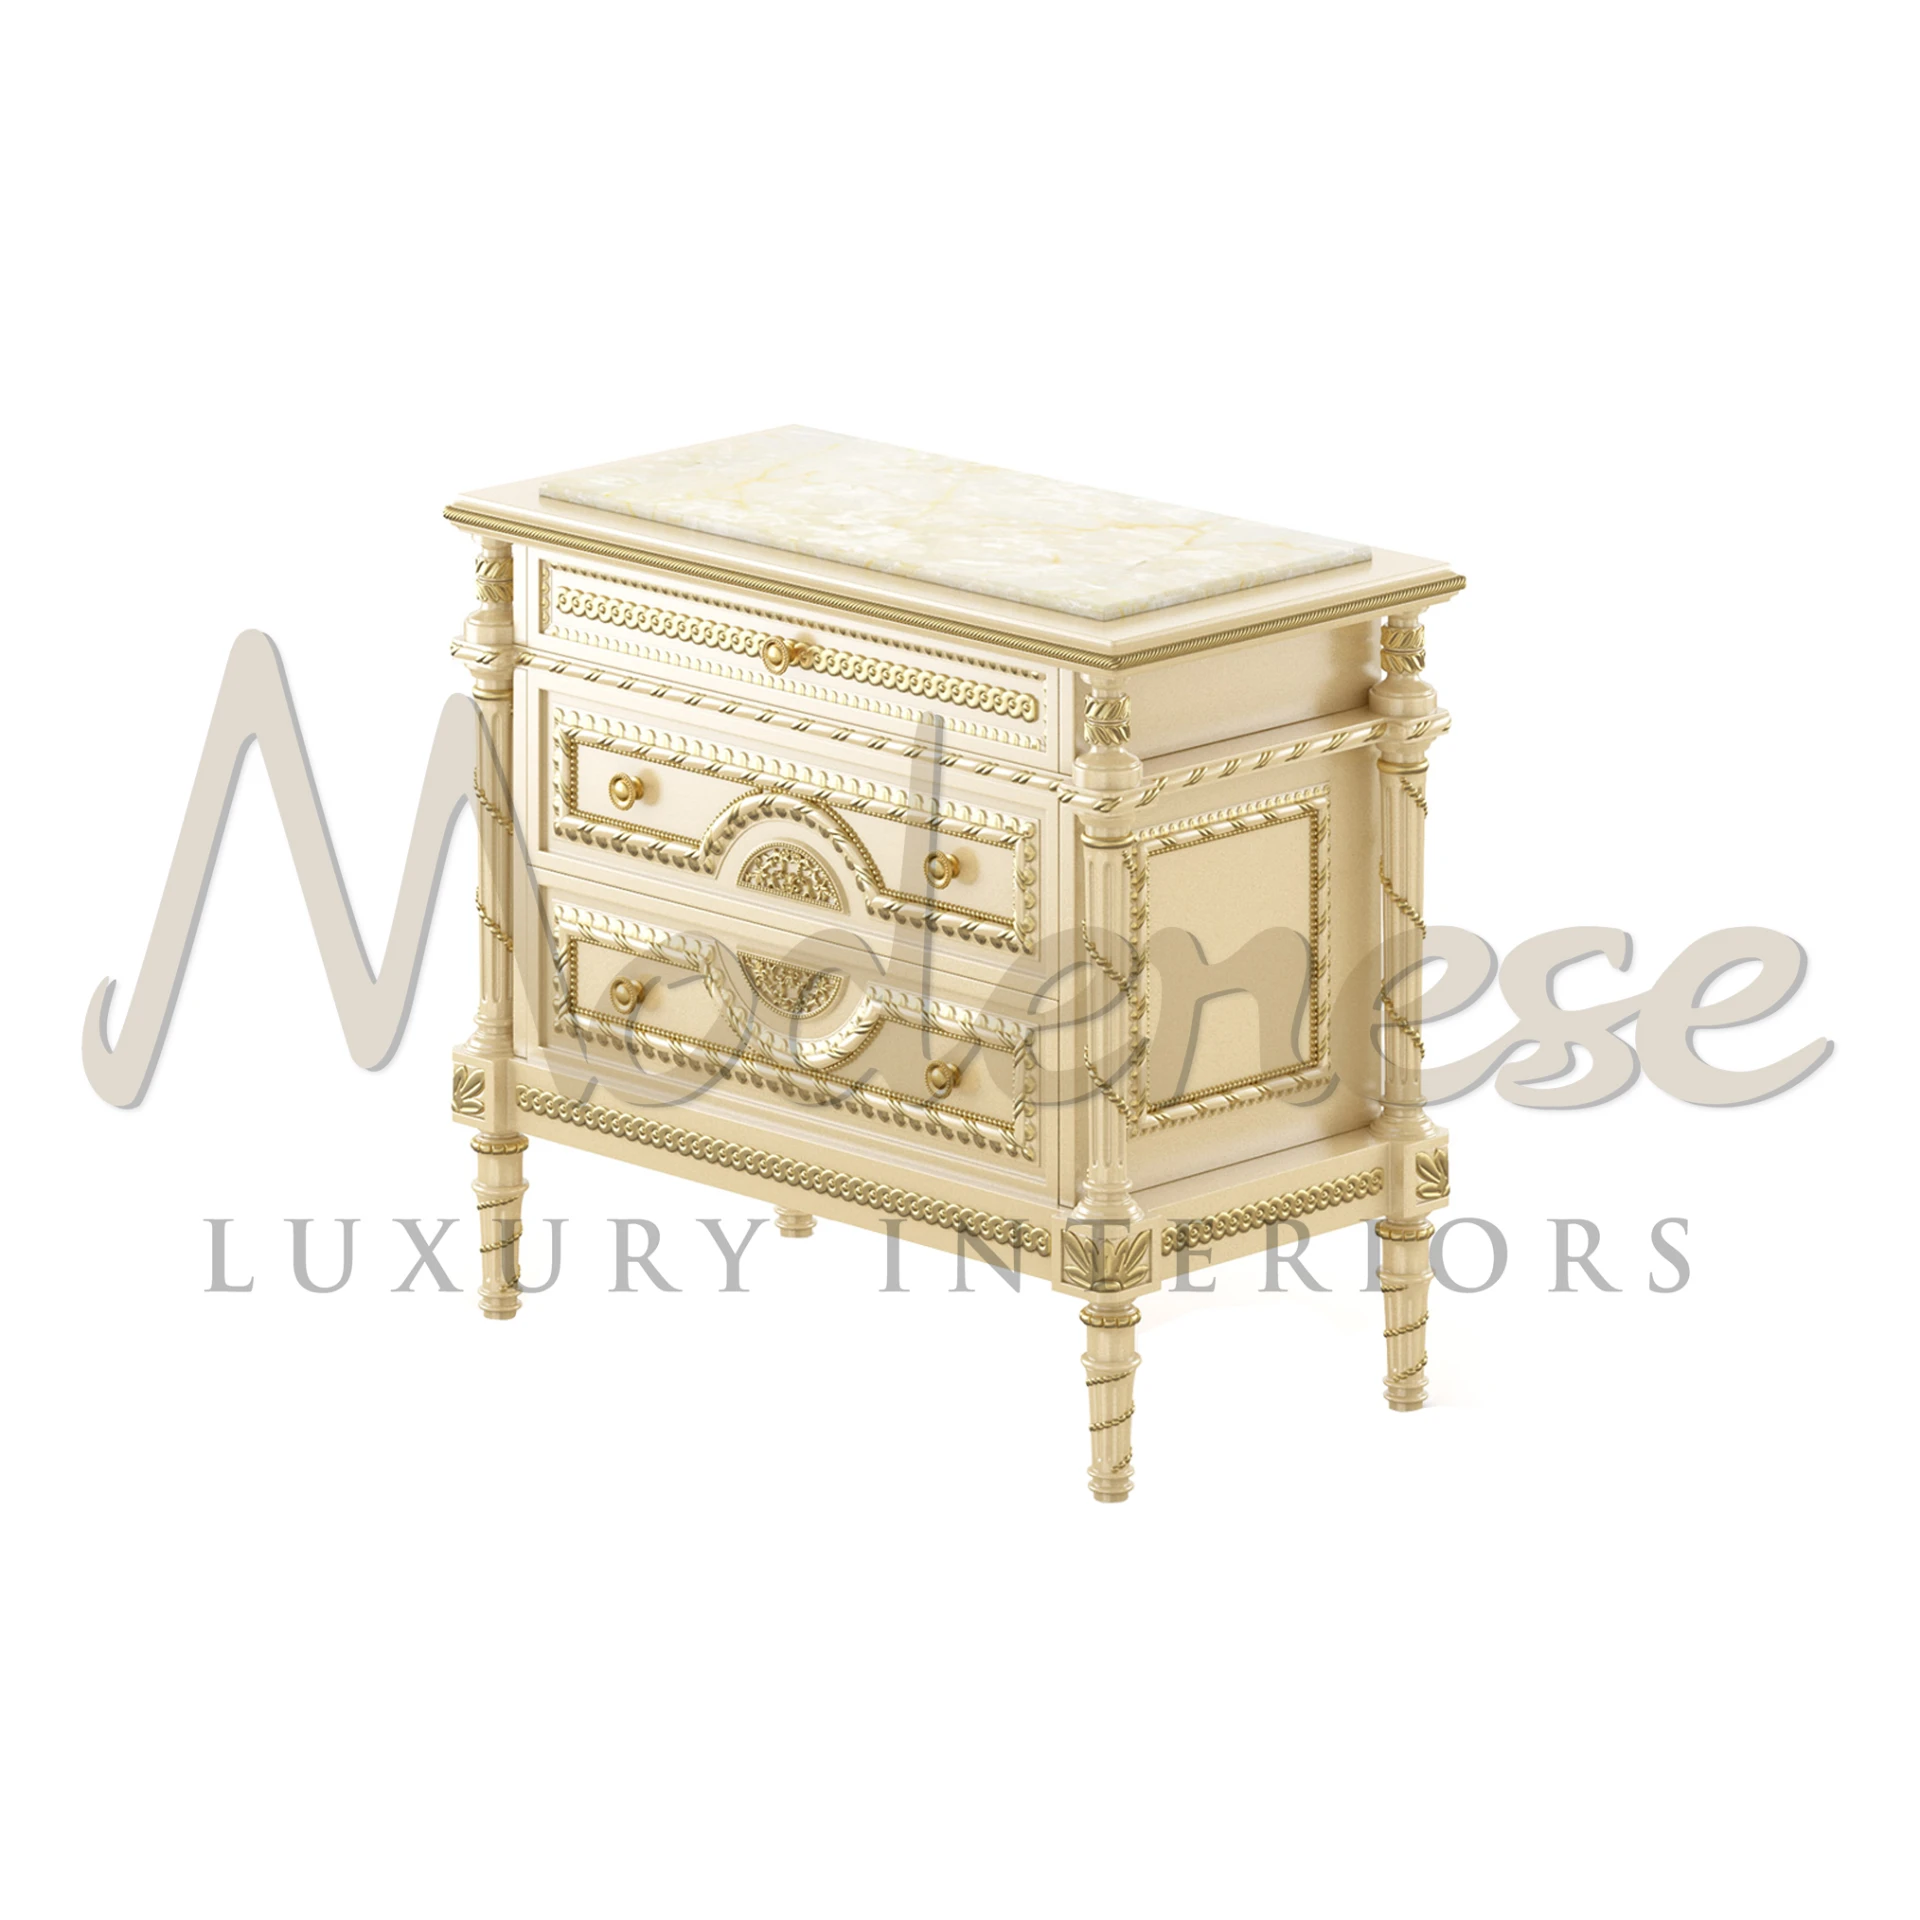 
An exquisite ivory-colored nightstand by Modenese Furniture Manufacturer, featuring a polished marble top, gold trim accents, and detailed ornamental carvings.